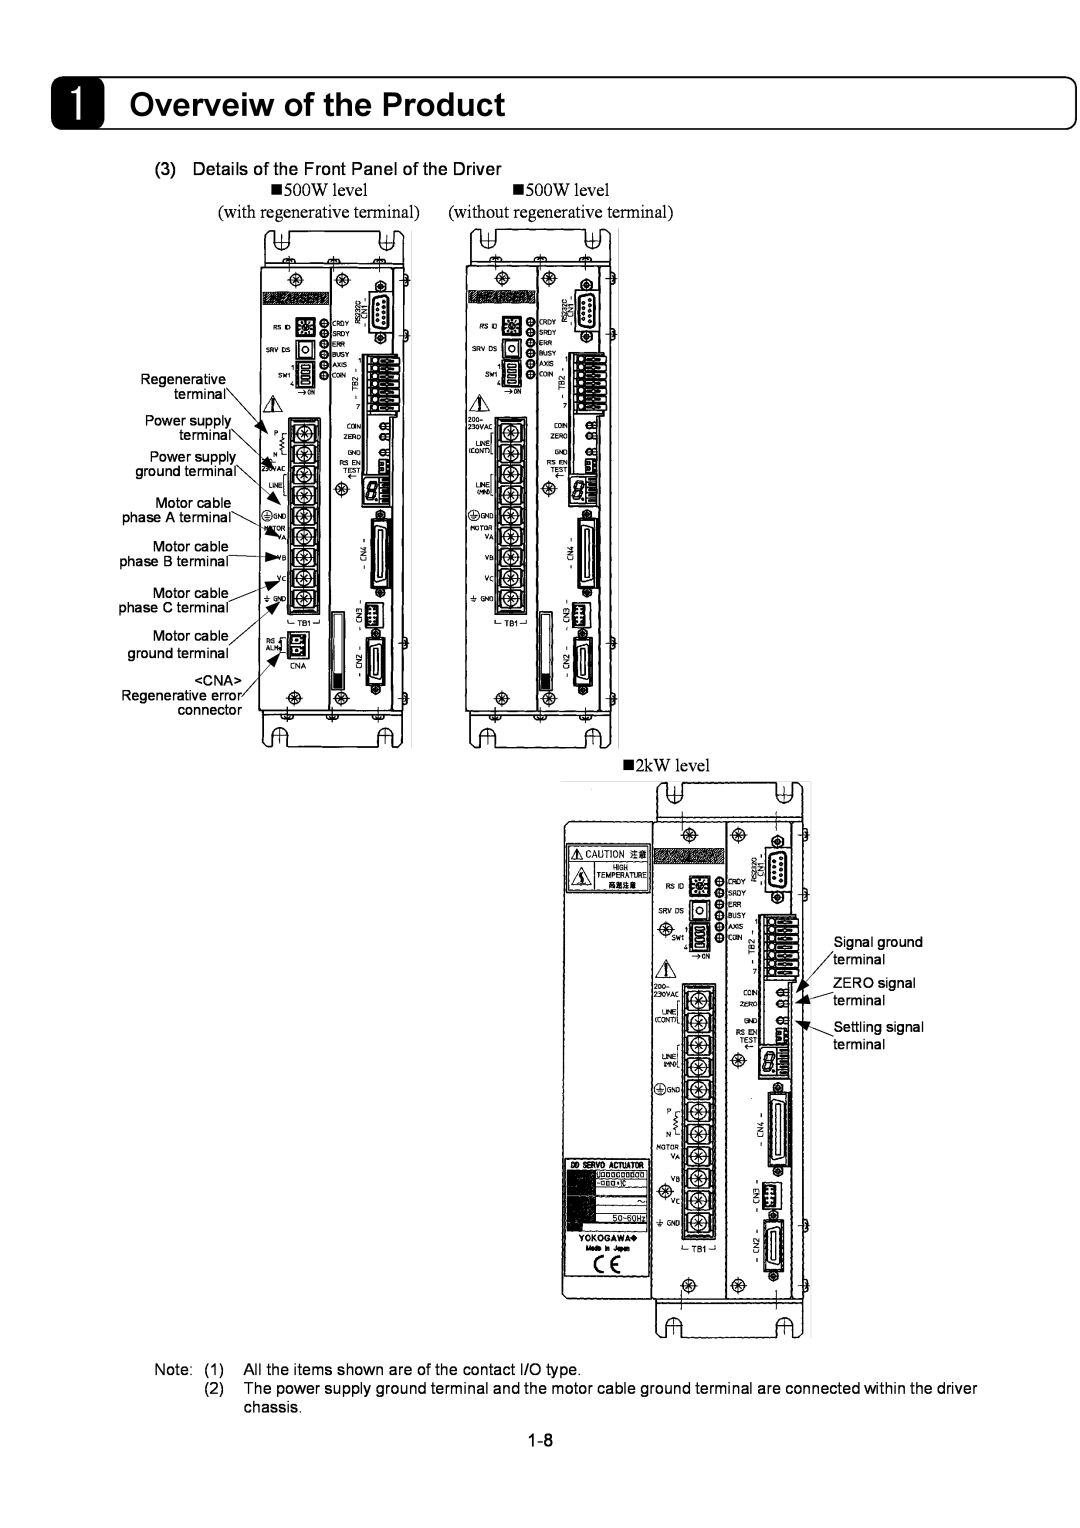 Parker Hannifin G2 manual Overveiw of the Product, Details of the Front Panel of the Driver 